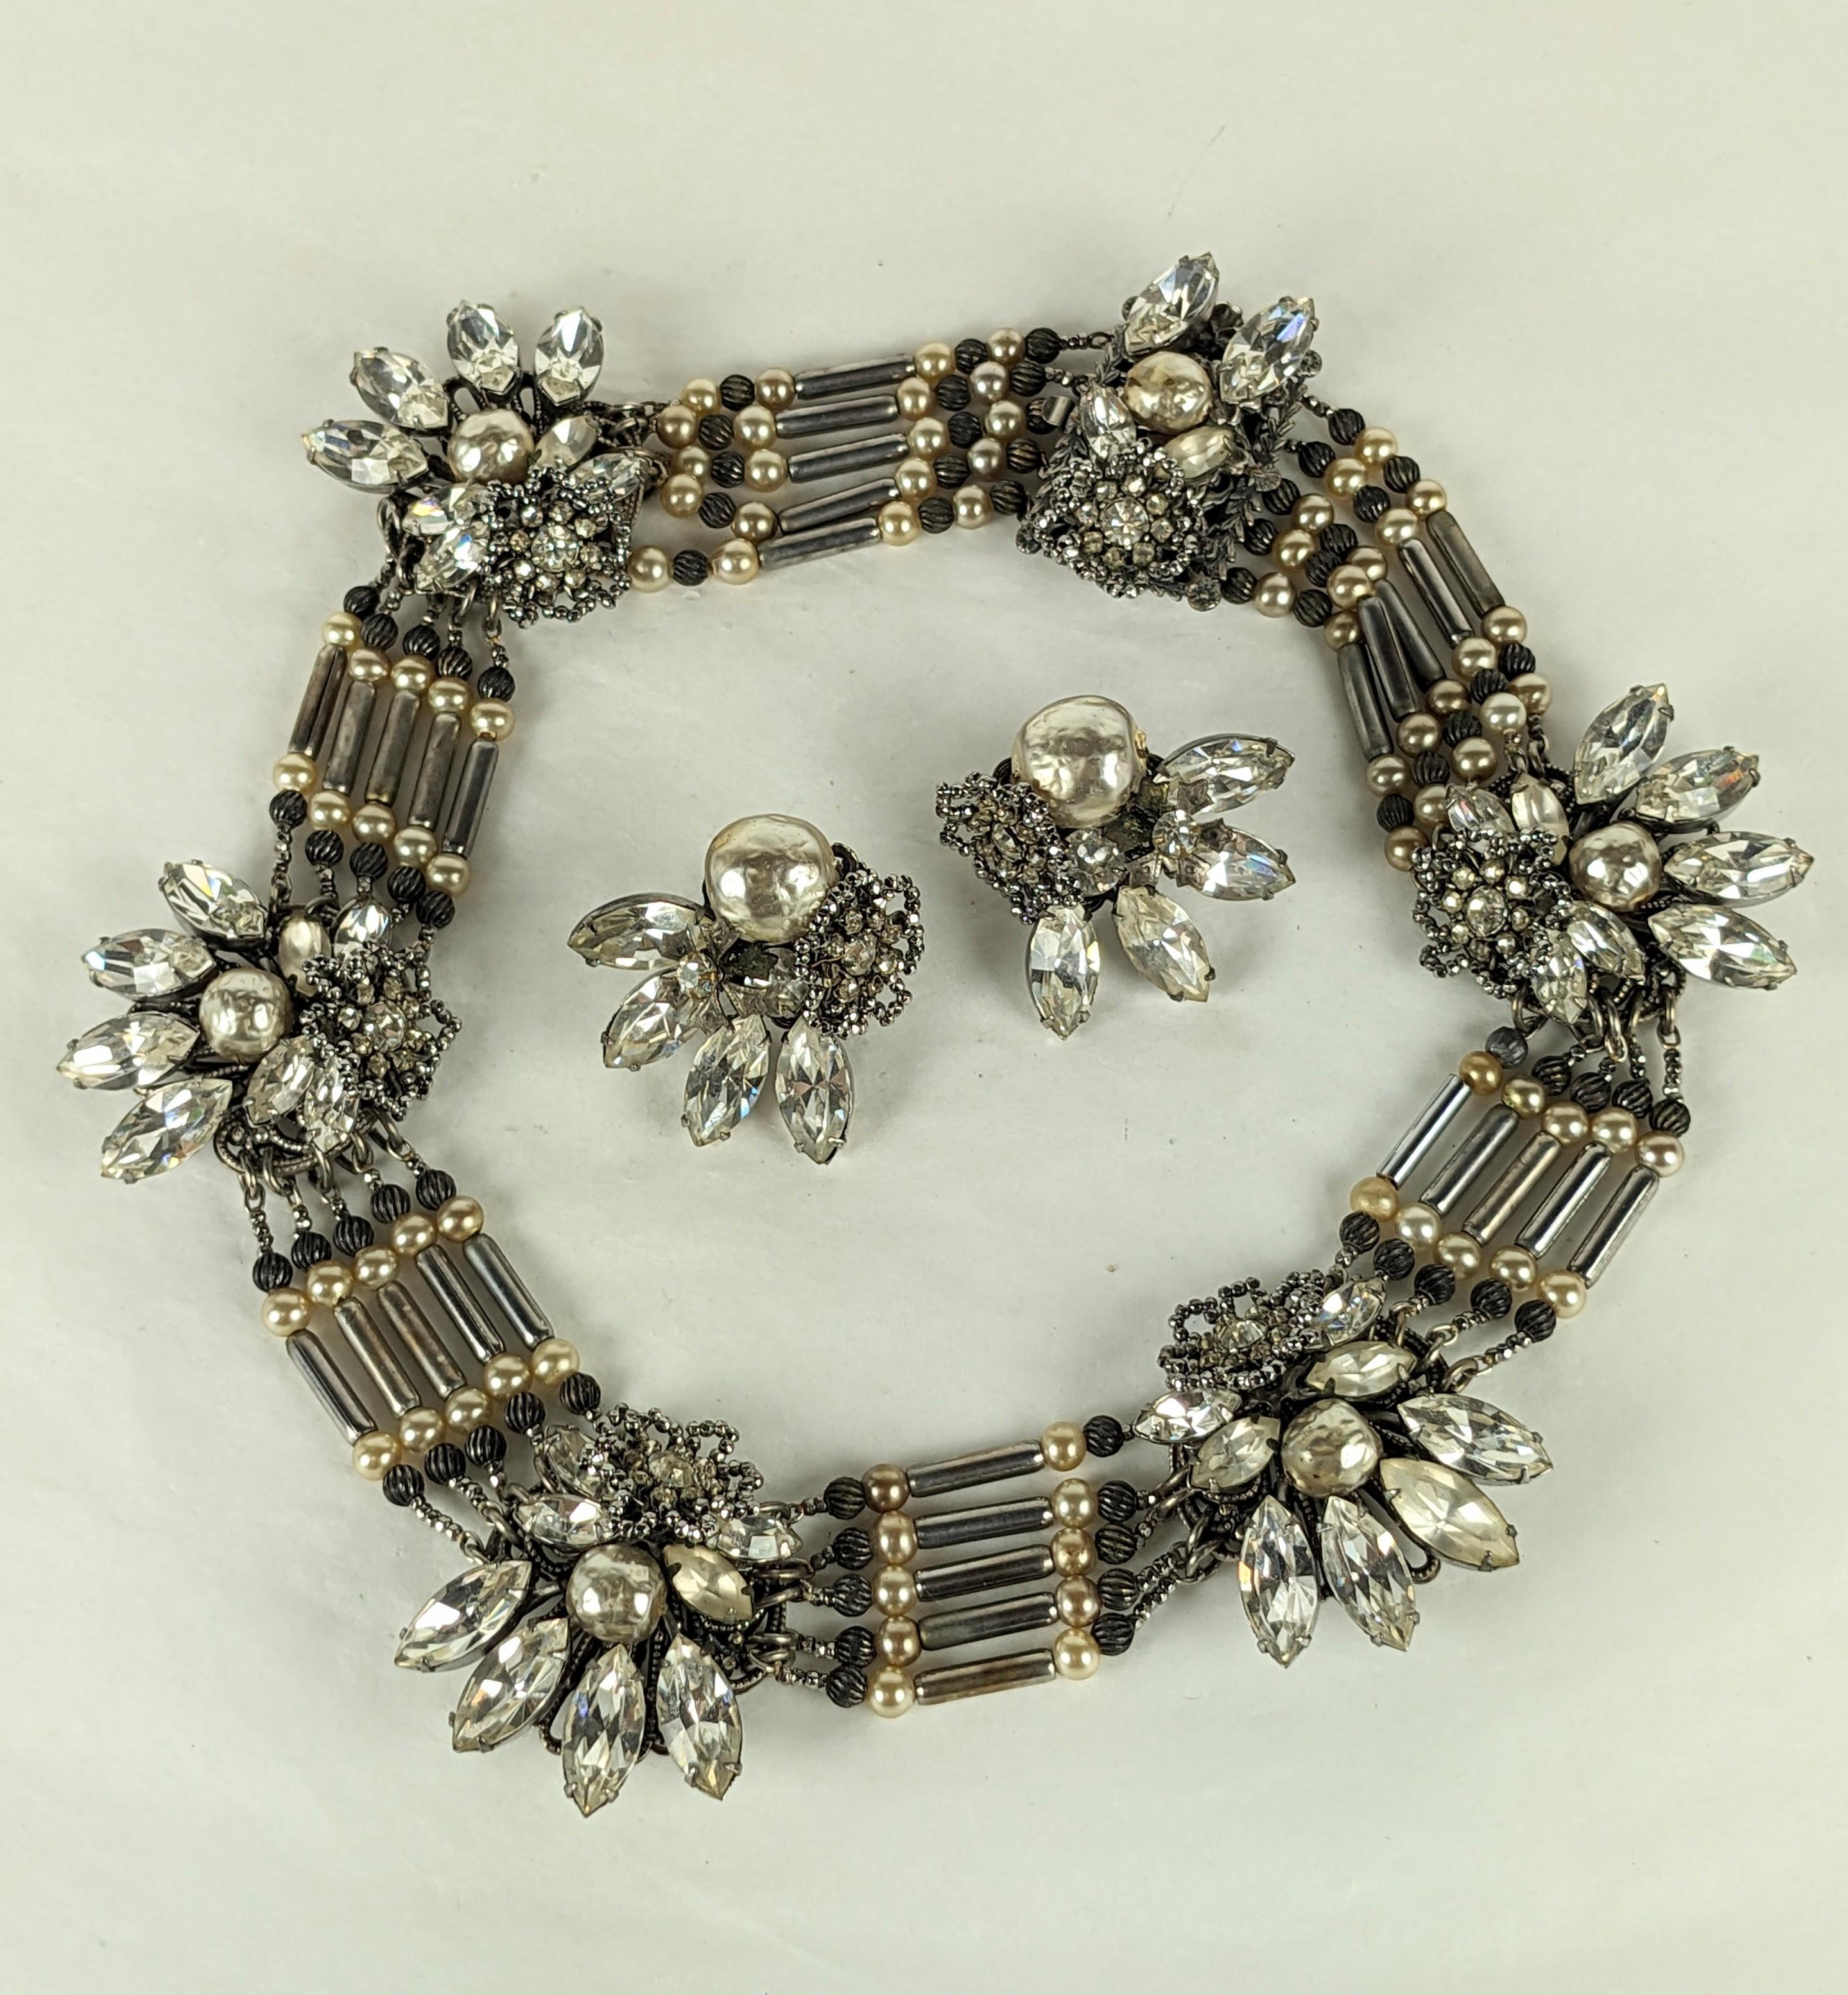 Extraordinary Miriam Haskell Pearl and Cut Steel Collar Suite from the 1940's. Elaborate stations of faux pearls, marquise crystals and cut steel florets strung between silver toggle beads, faux pearls and cut steels. Matching clip earrings with